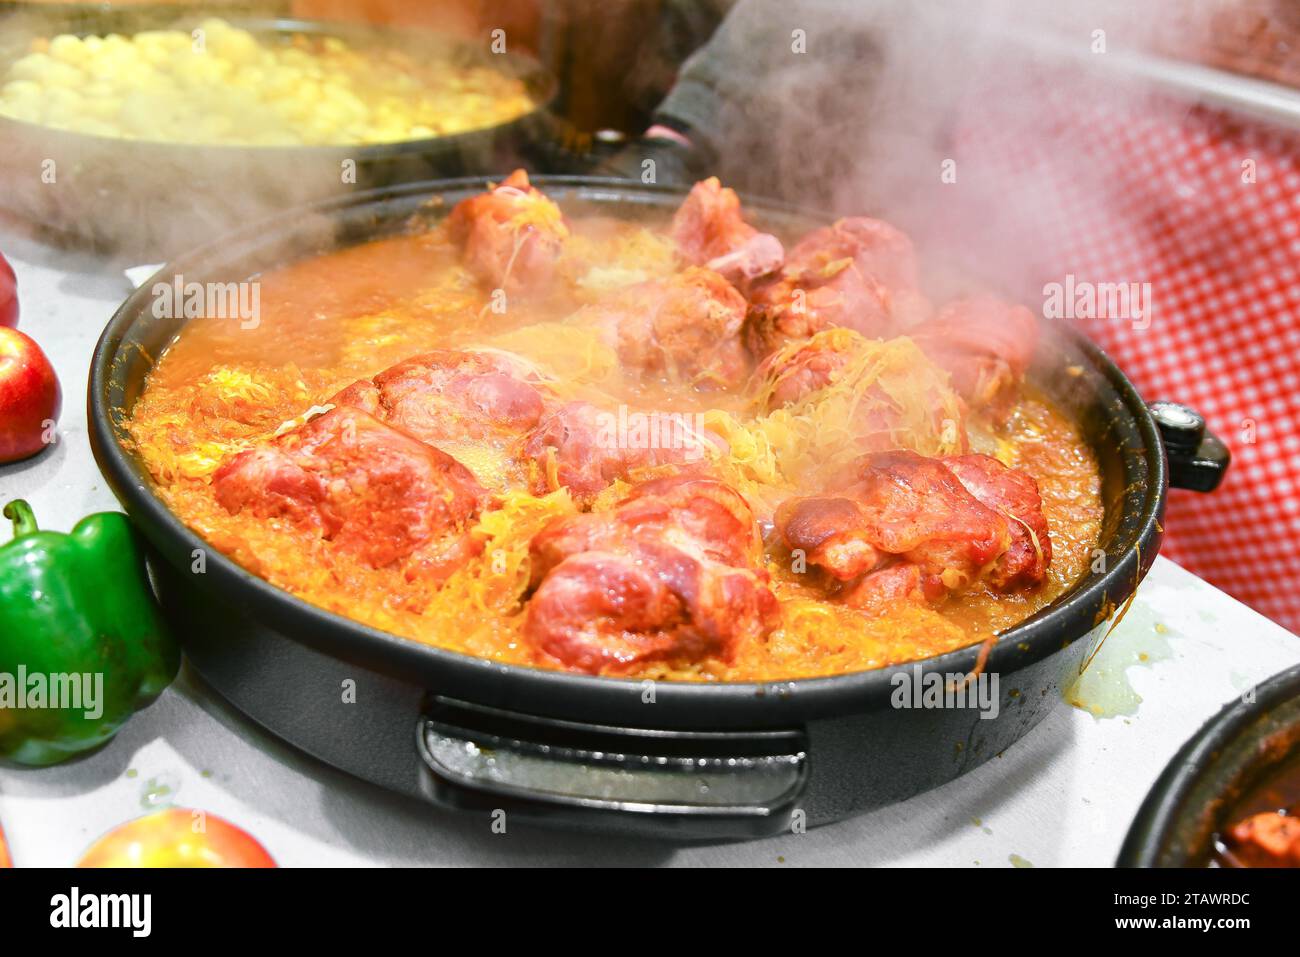 Street food meat ready to eat. Europian christmas market takeaway traditional hot food. Stock Photo